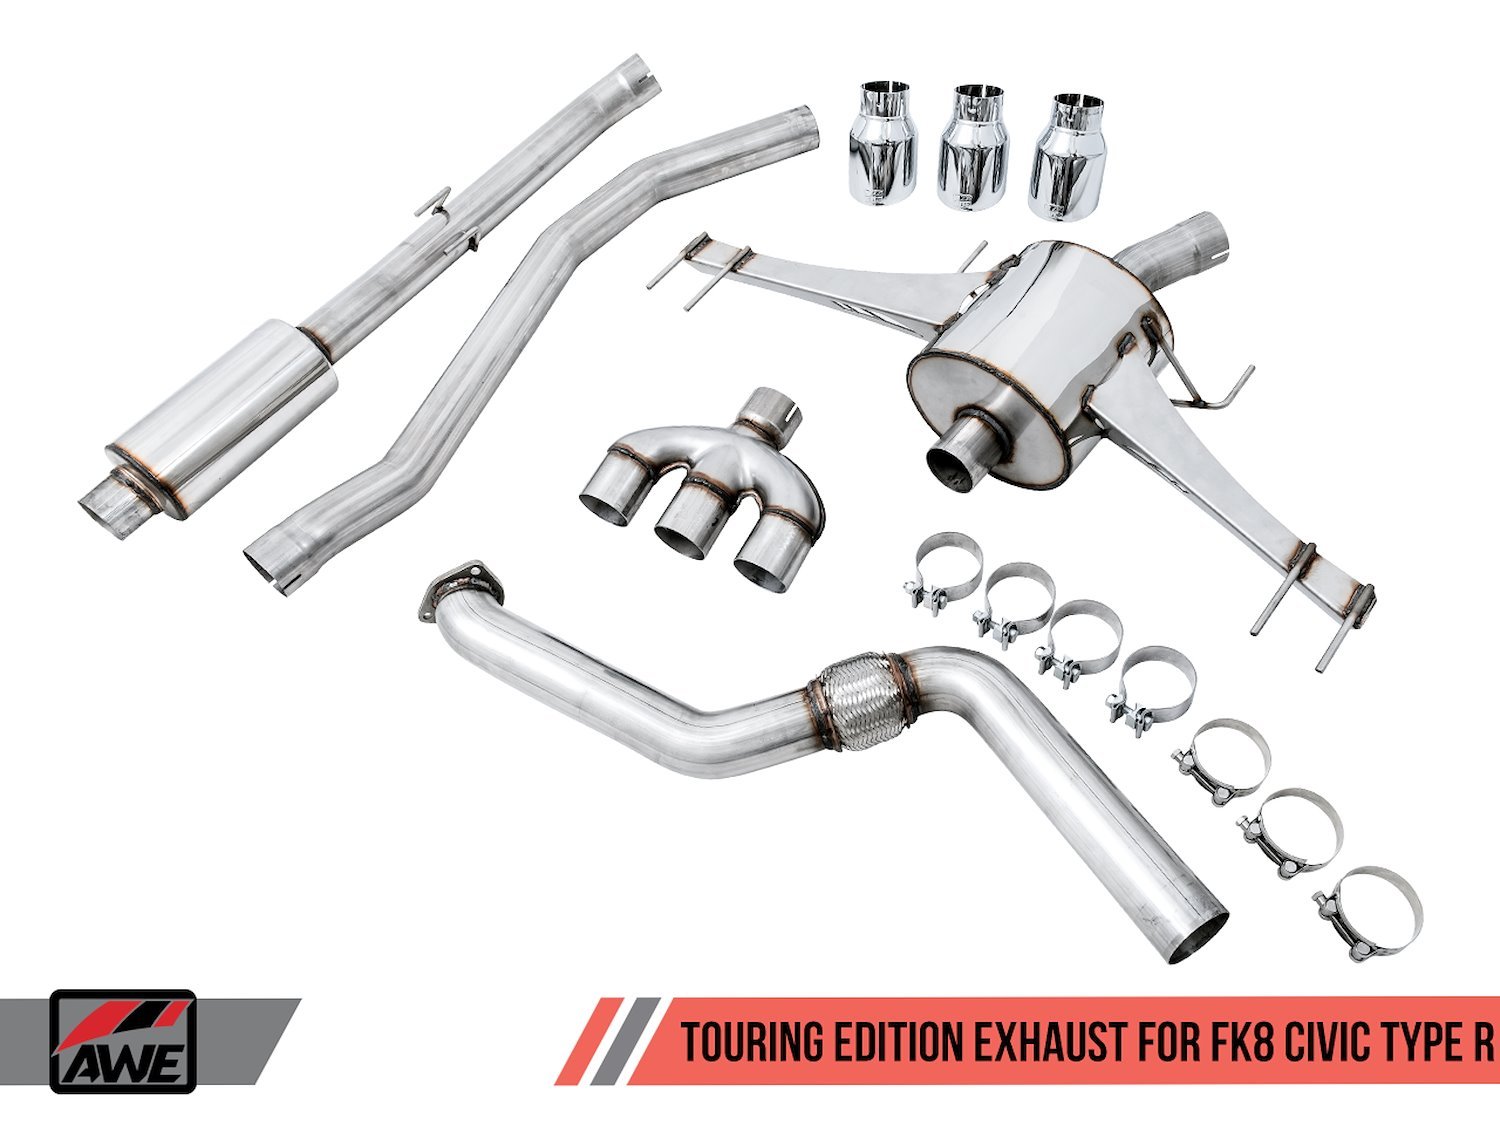 AWE Touring Edition Exhaust for FK8 Civic Type